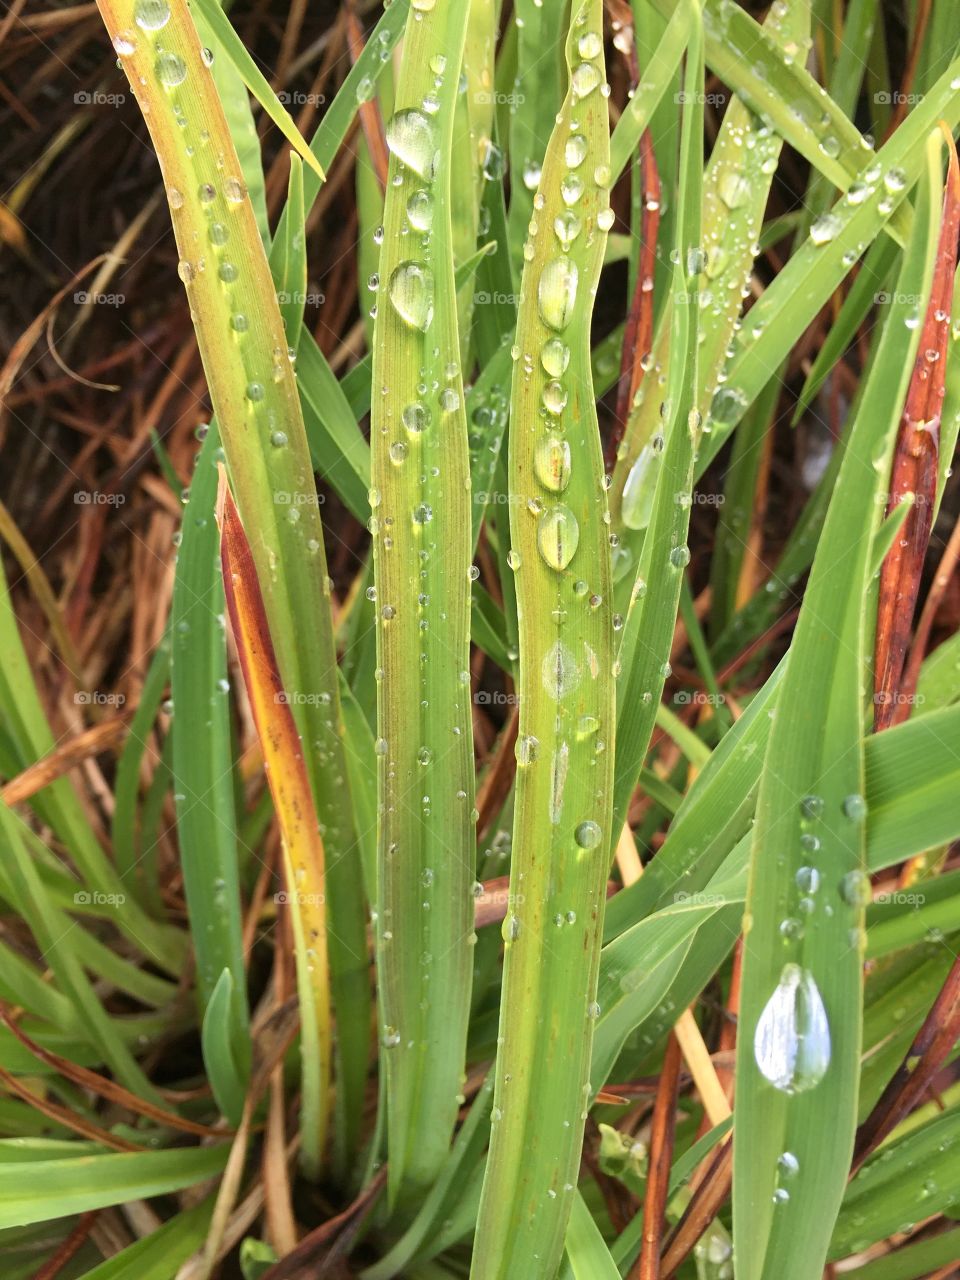 Water on blades of grass